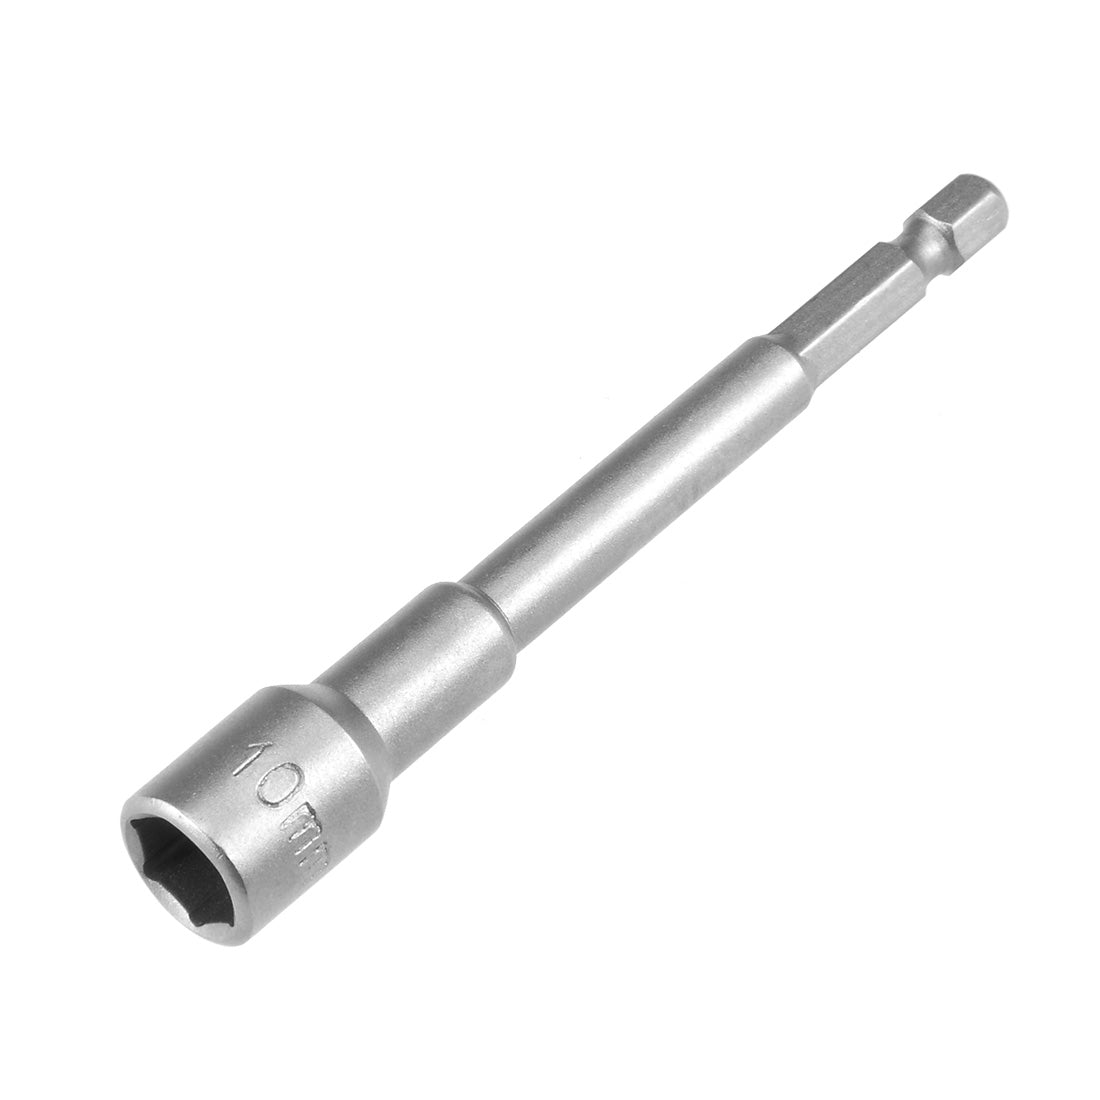 Uxcell Uxcell 1/4" Quick Change Shank 19mm Non-Magnetic Nut Socket Driver Wrench, 4" Length